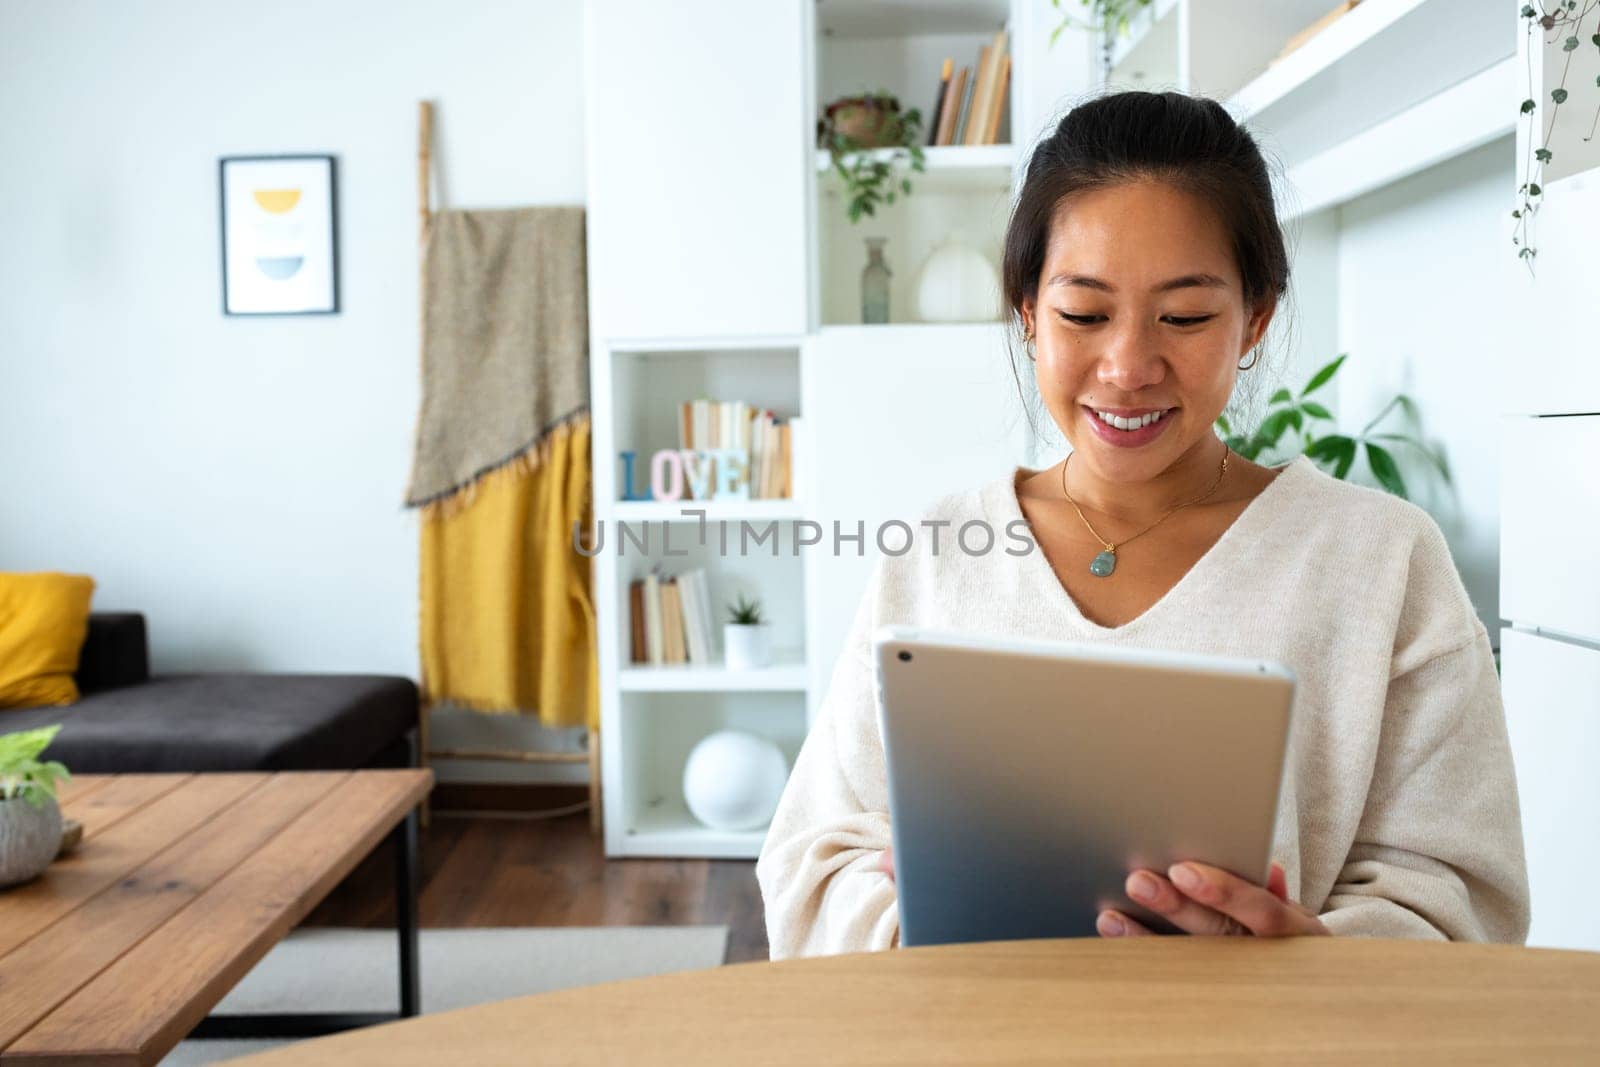 Happy and smiling young Asian woman working at home office holding tablet reading document. Social media. Technology concept.